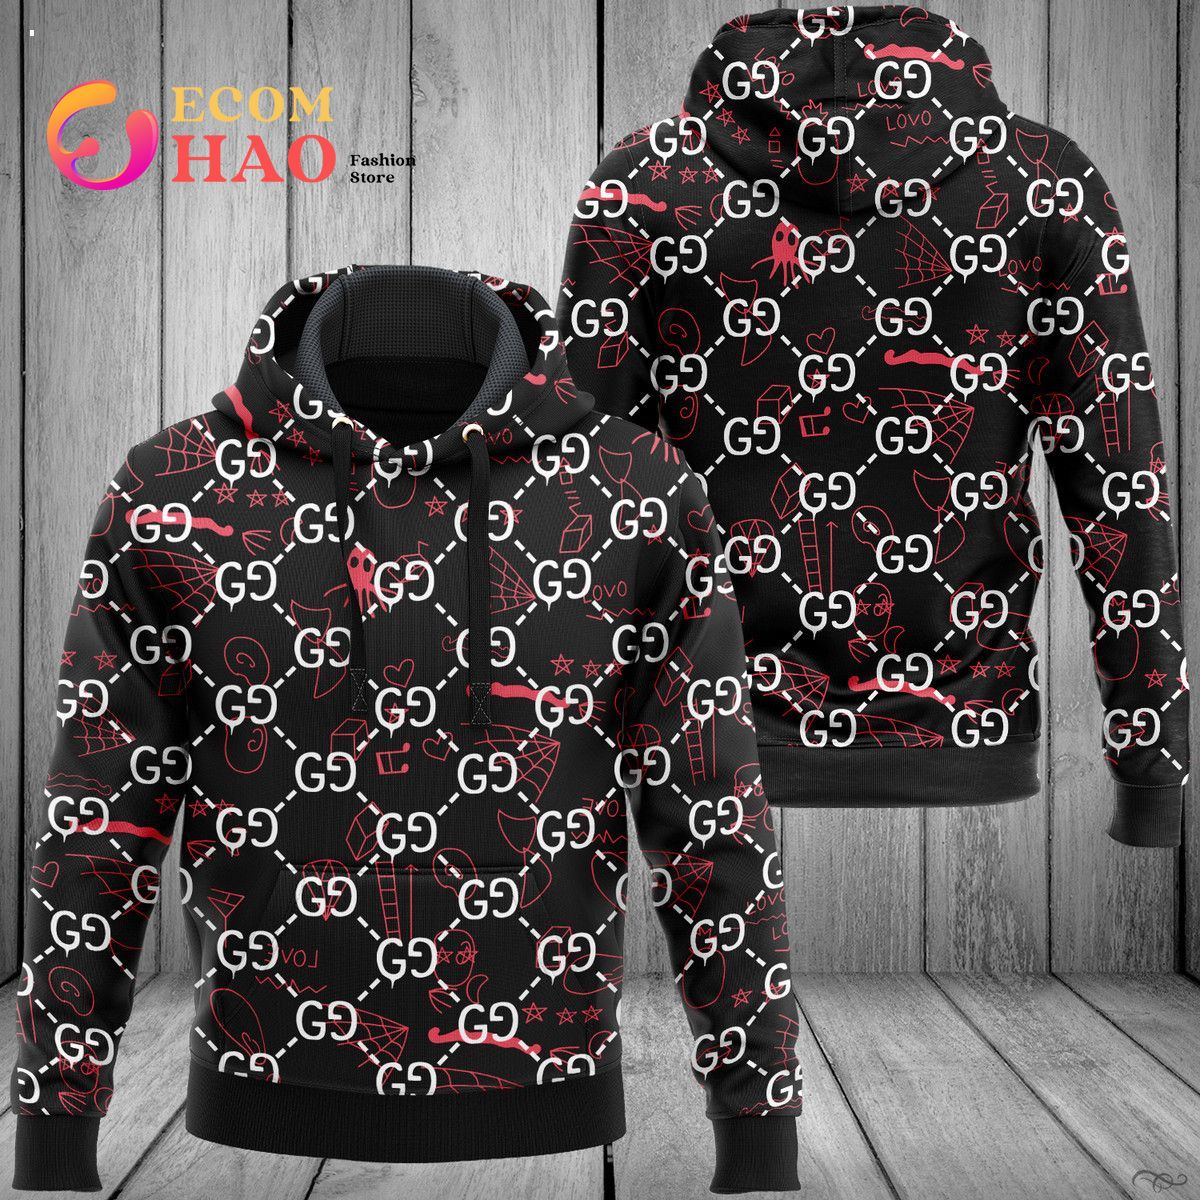 Gucci 3D Hoodie Black And White - Ecomhao Store